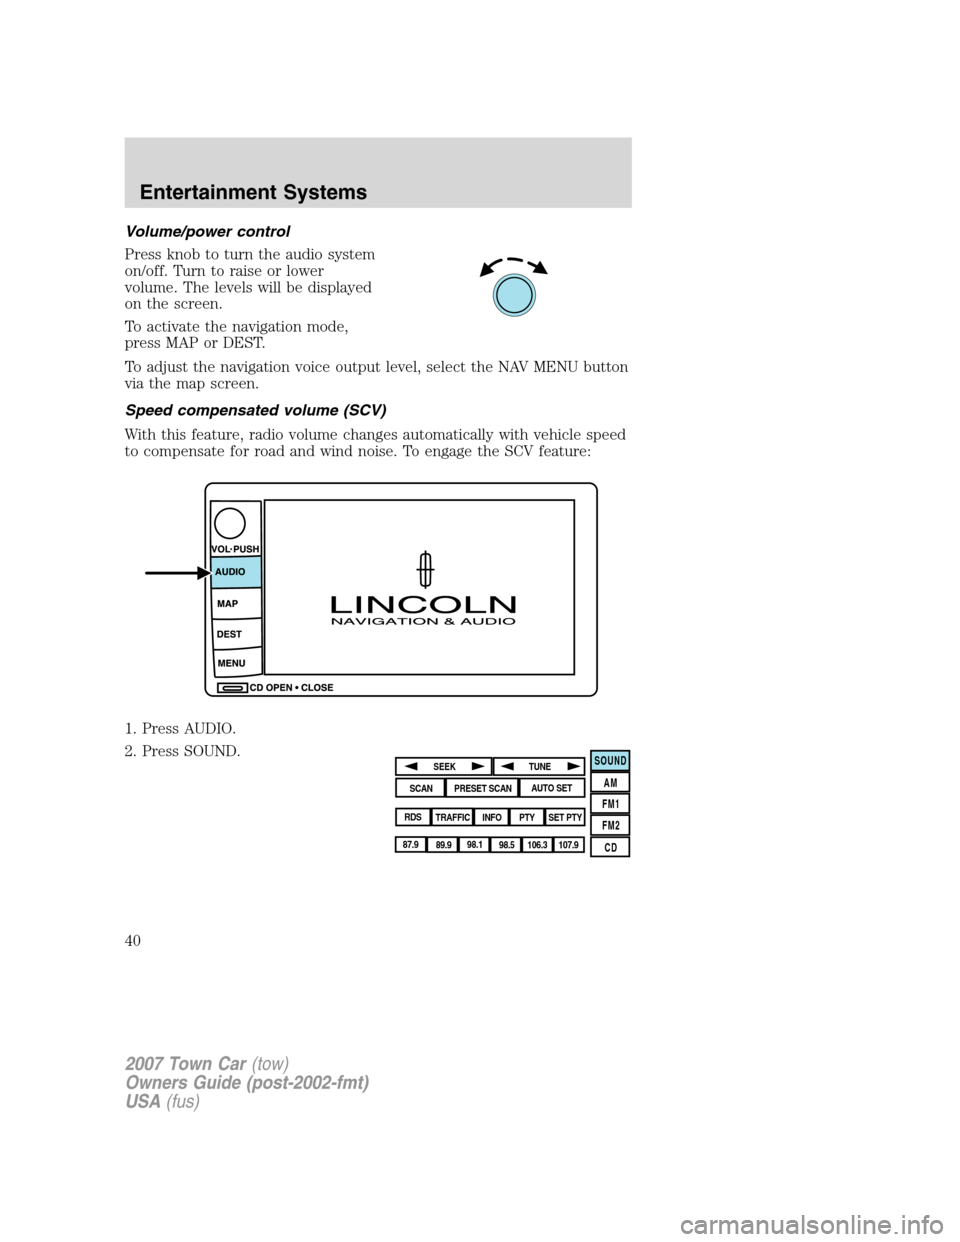 LINCOLN TOWN CAR 2007 Owners Guide Volume/power control
Press knob to turn the audio system
on/off. Turn to raise or lower
volume. The levels will be displayed
on the screen.
To activate the navigation mode,
press MAP or DEST.
To adjus